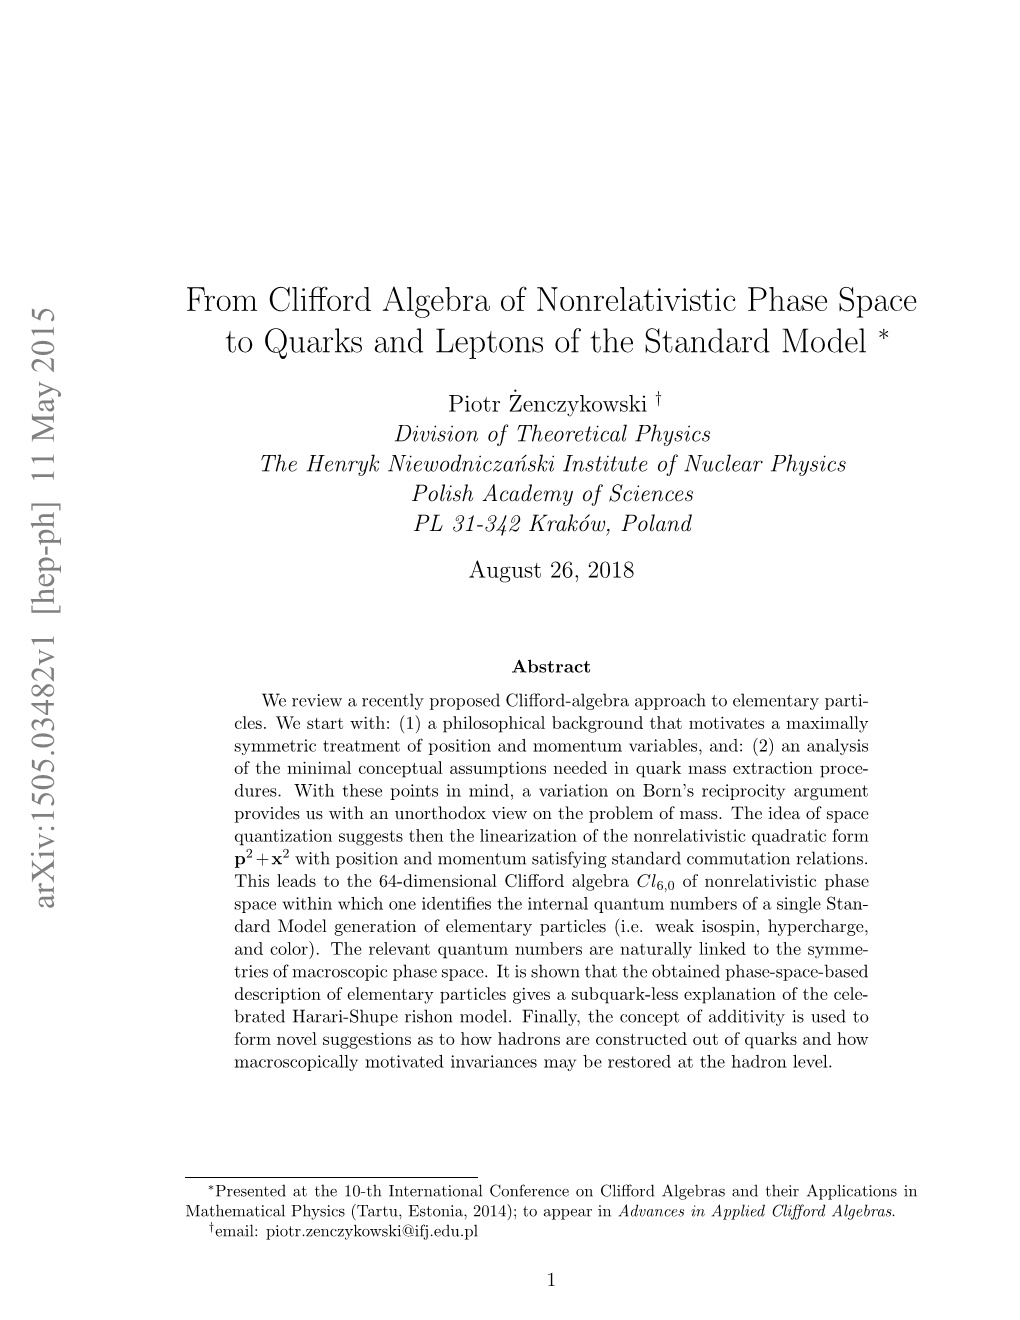 From Clifford Algebra of Nonrelativistic Phase Space to Quarks And